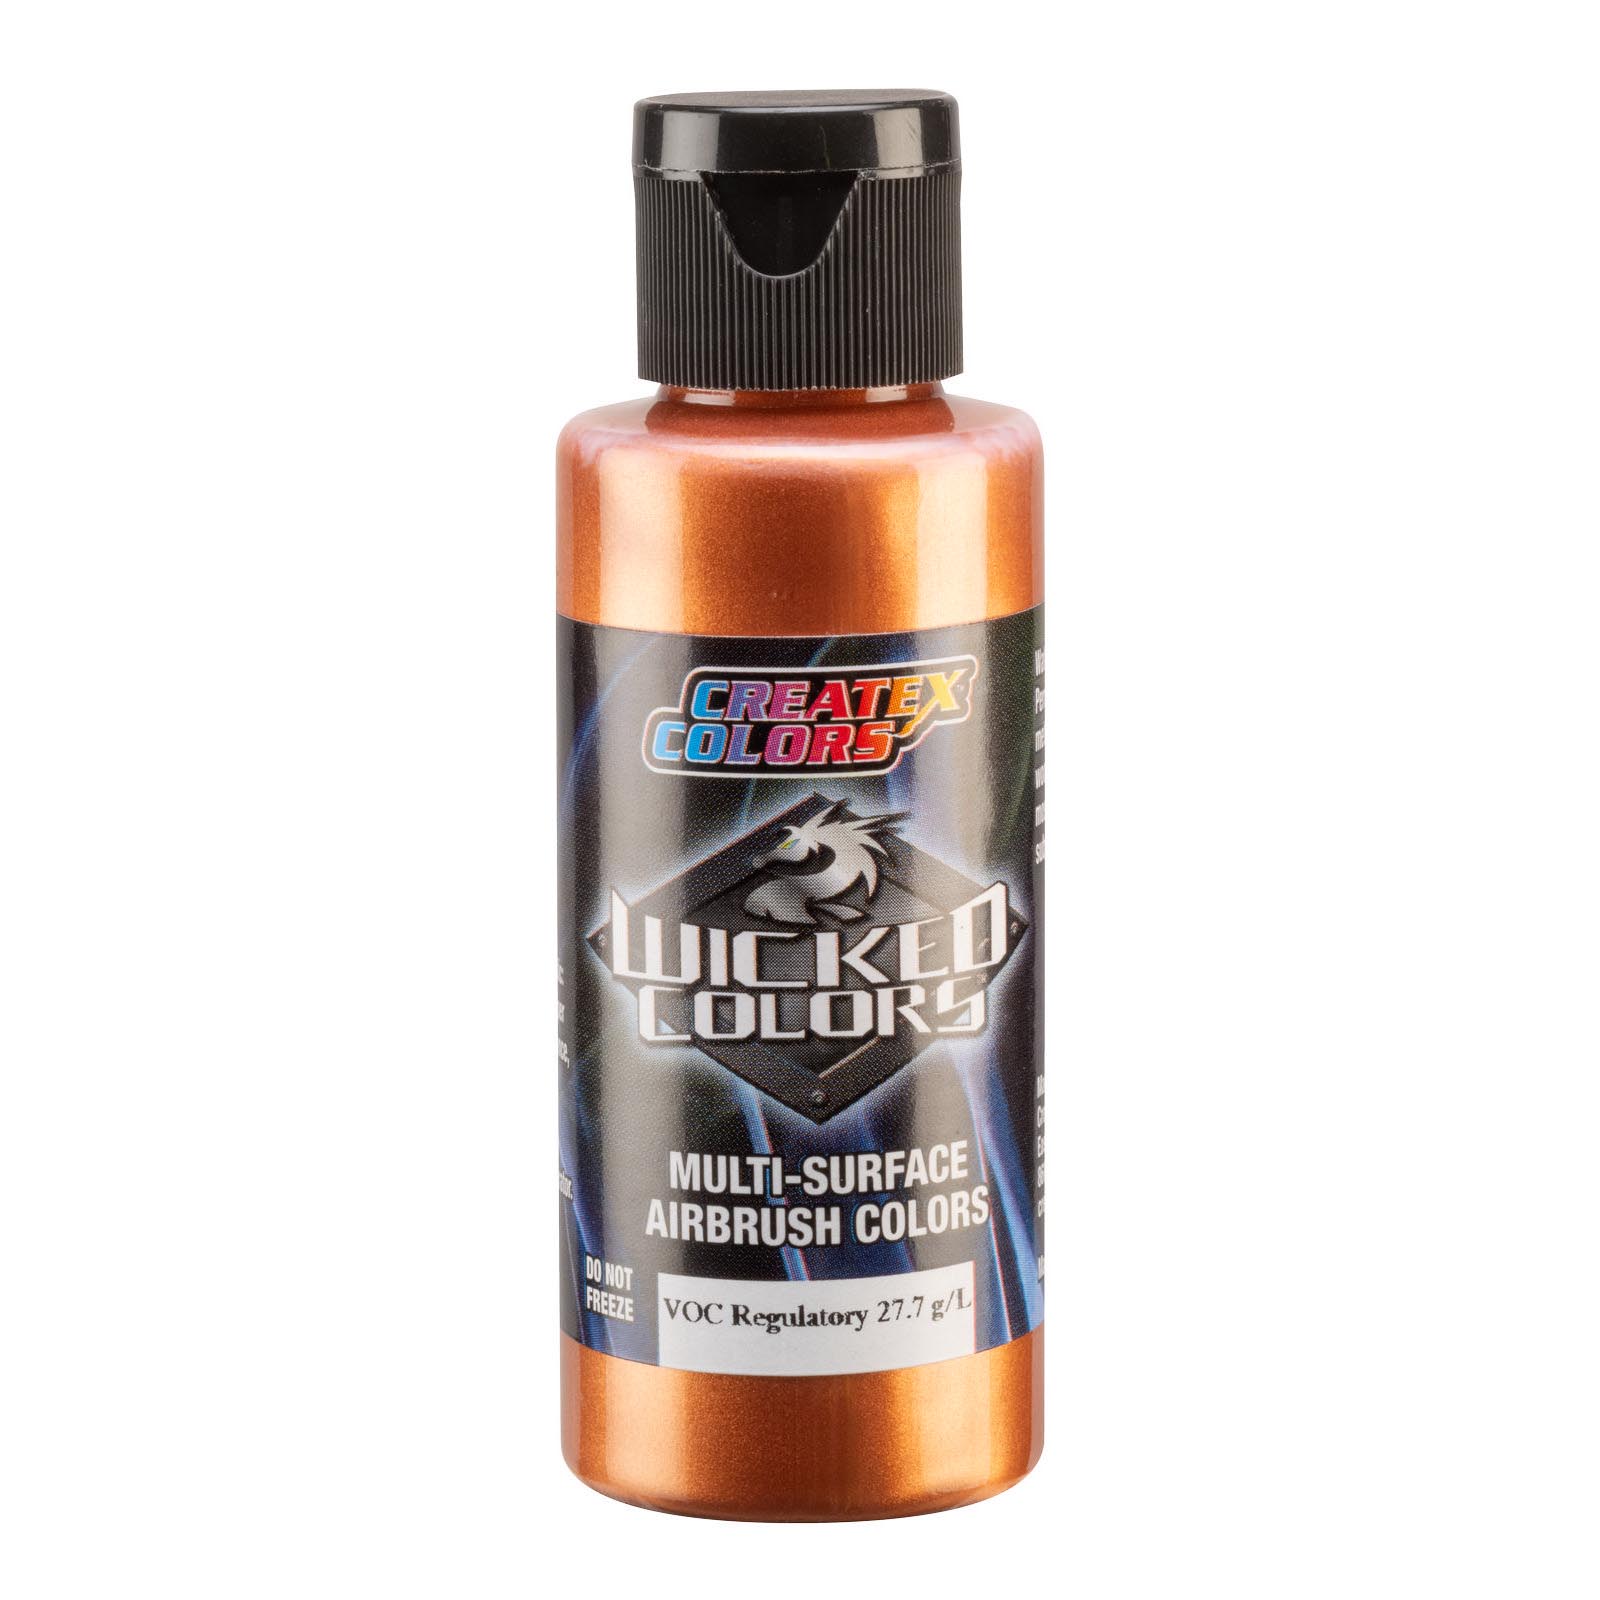 Satin Gold - Pearlized Airbrush Paint, 4 oz.